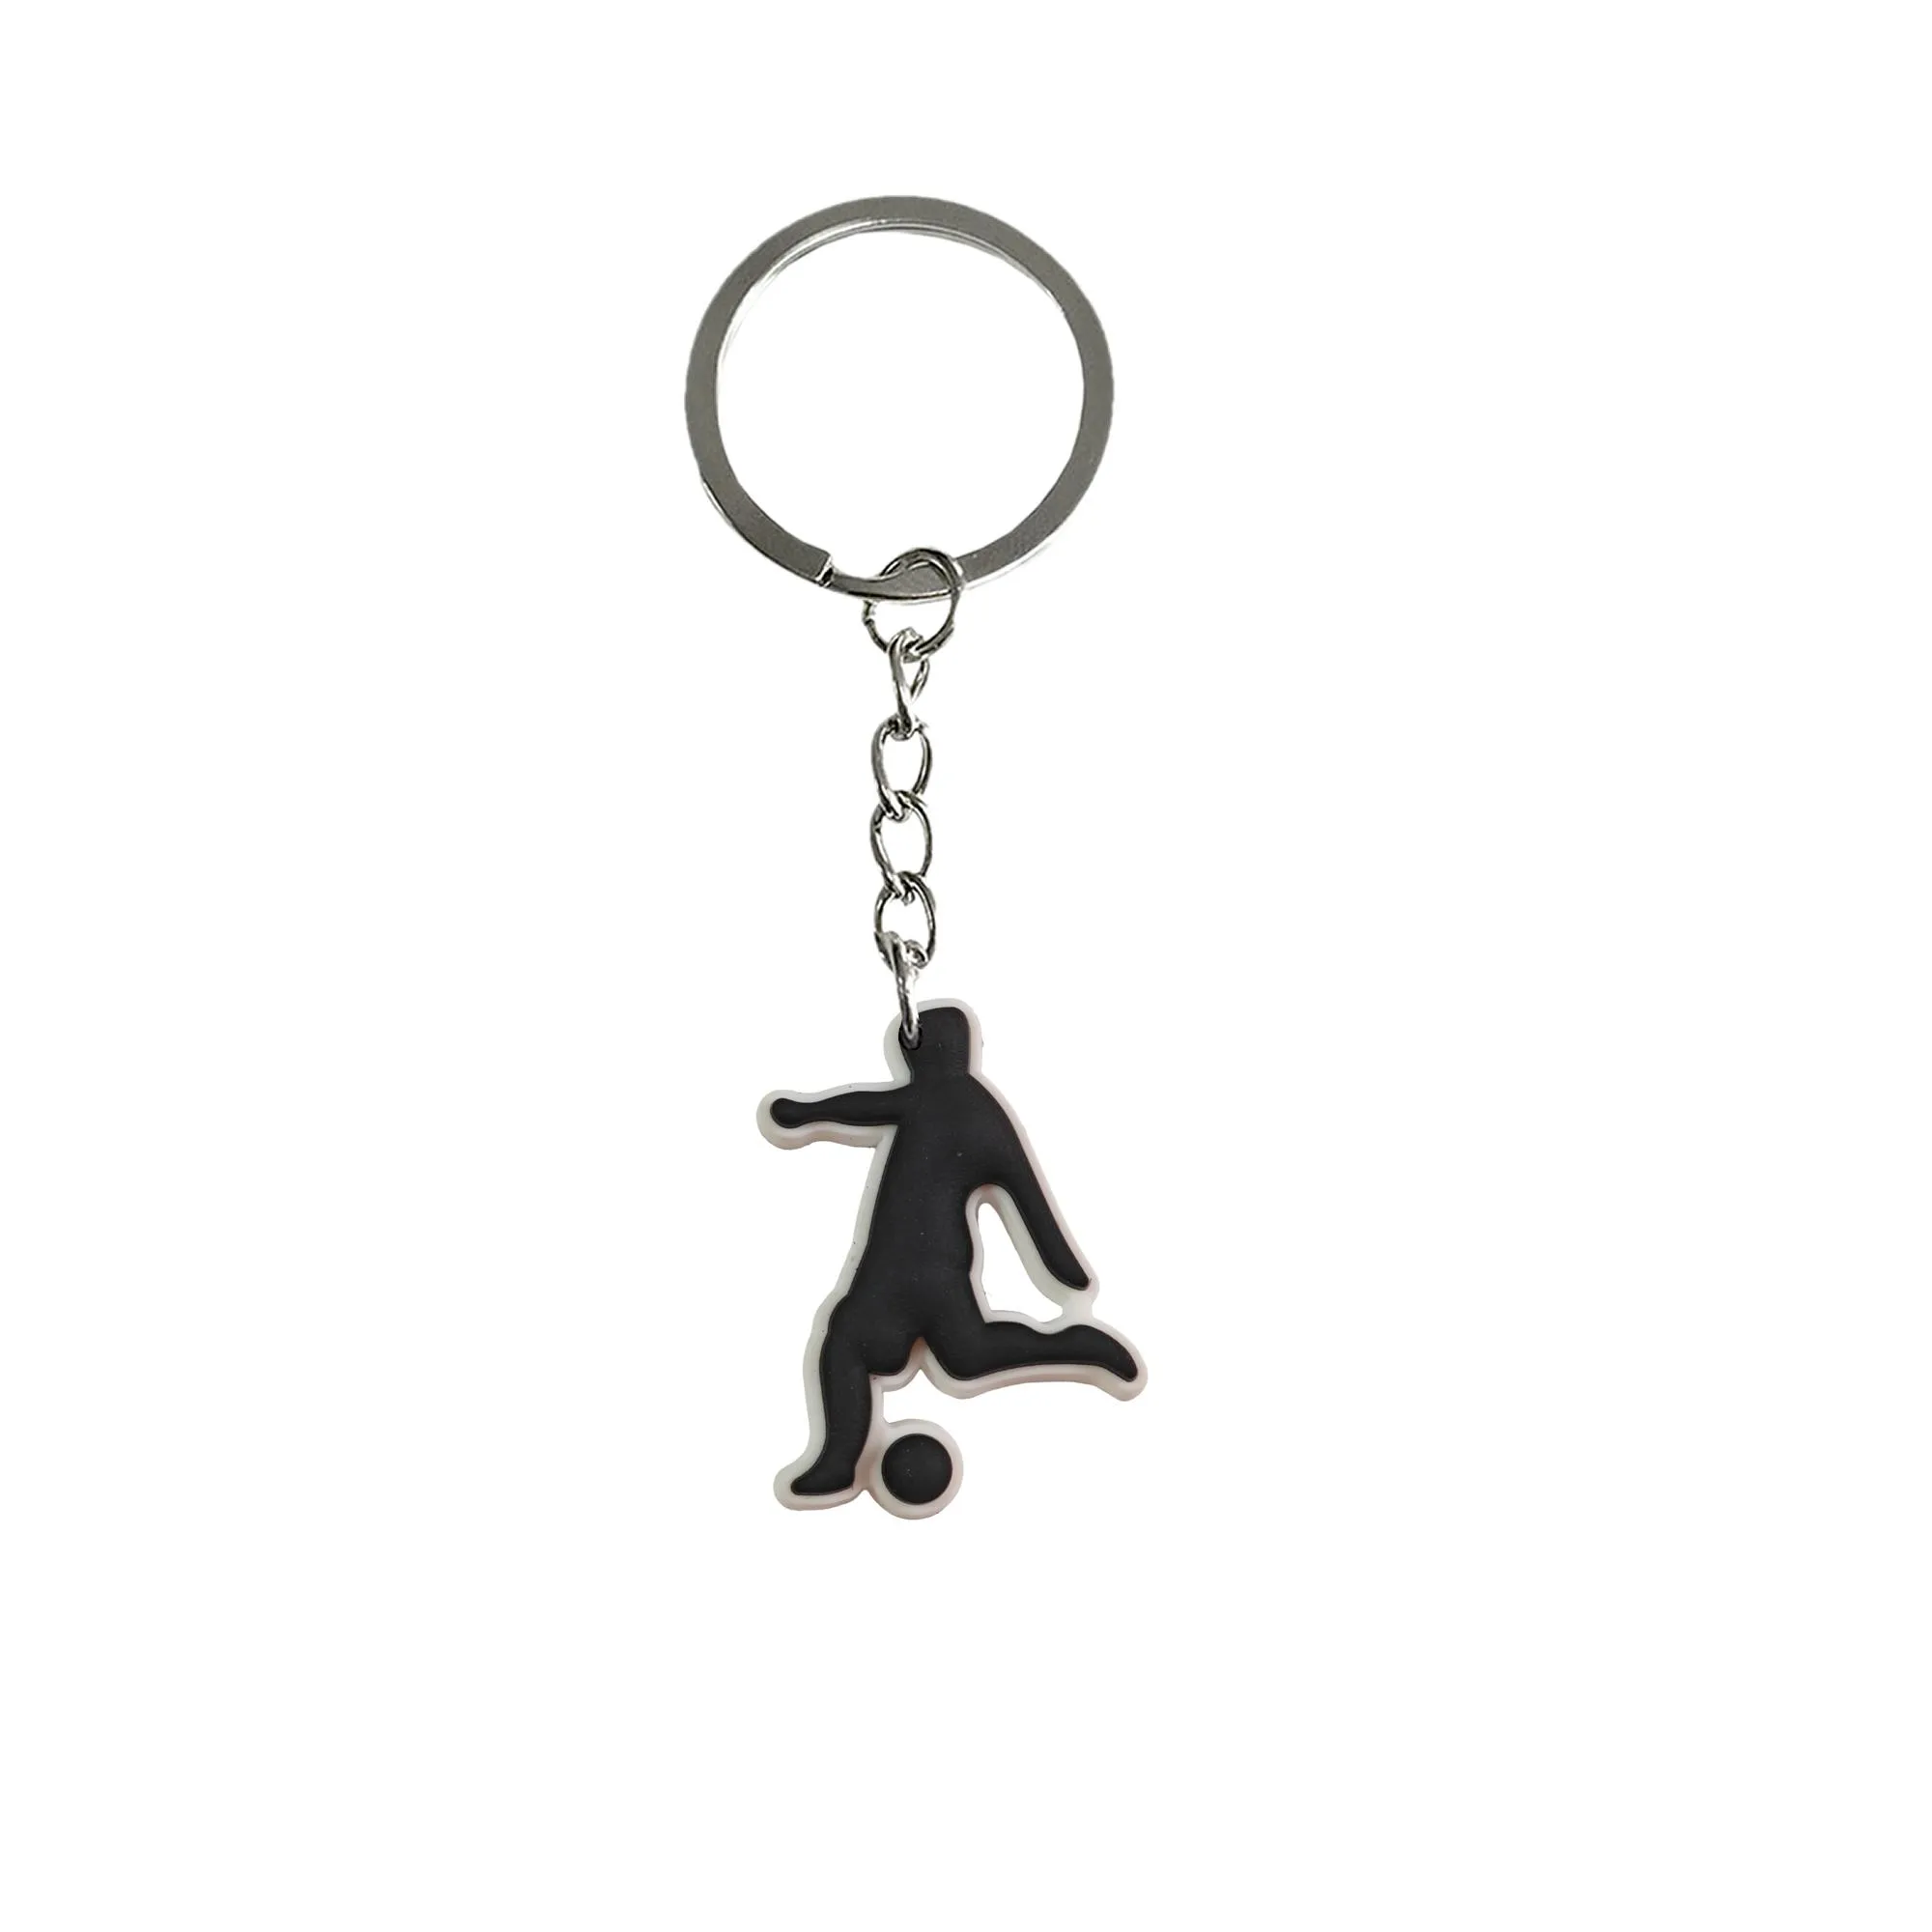 football keychain for goodie bag stuffers supplies couple backpack key chains women keyring classroom school day birthday party gift suitable schoolbag car keychains men